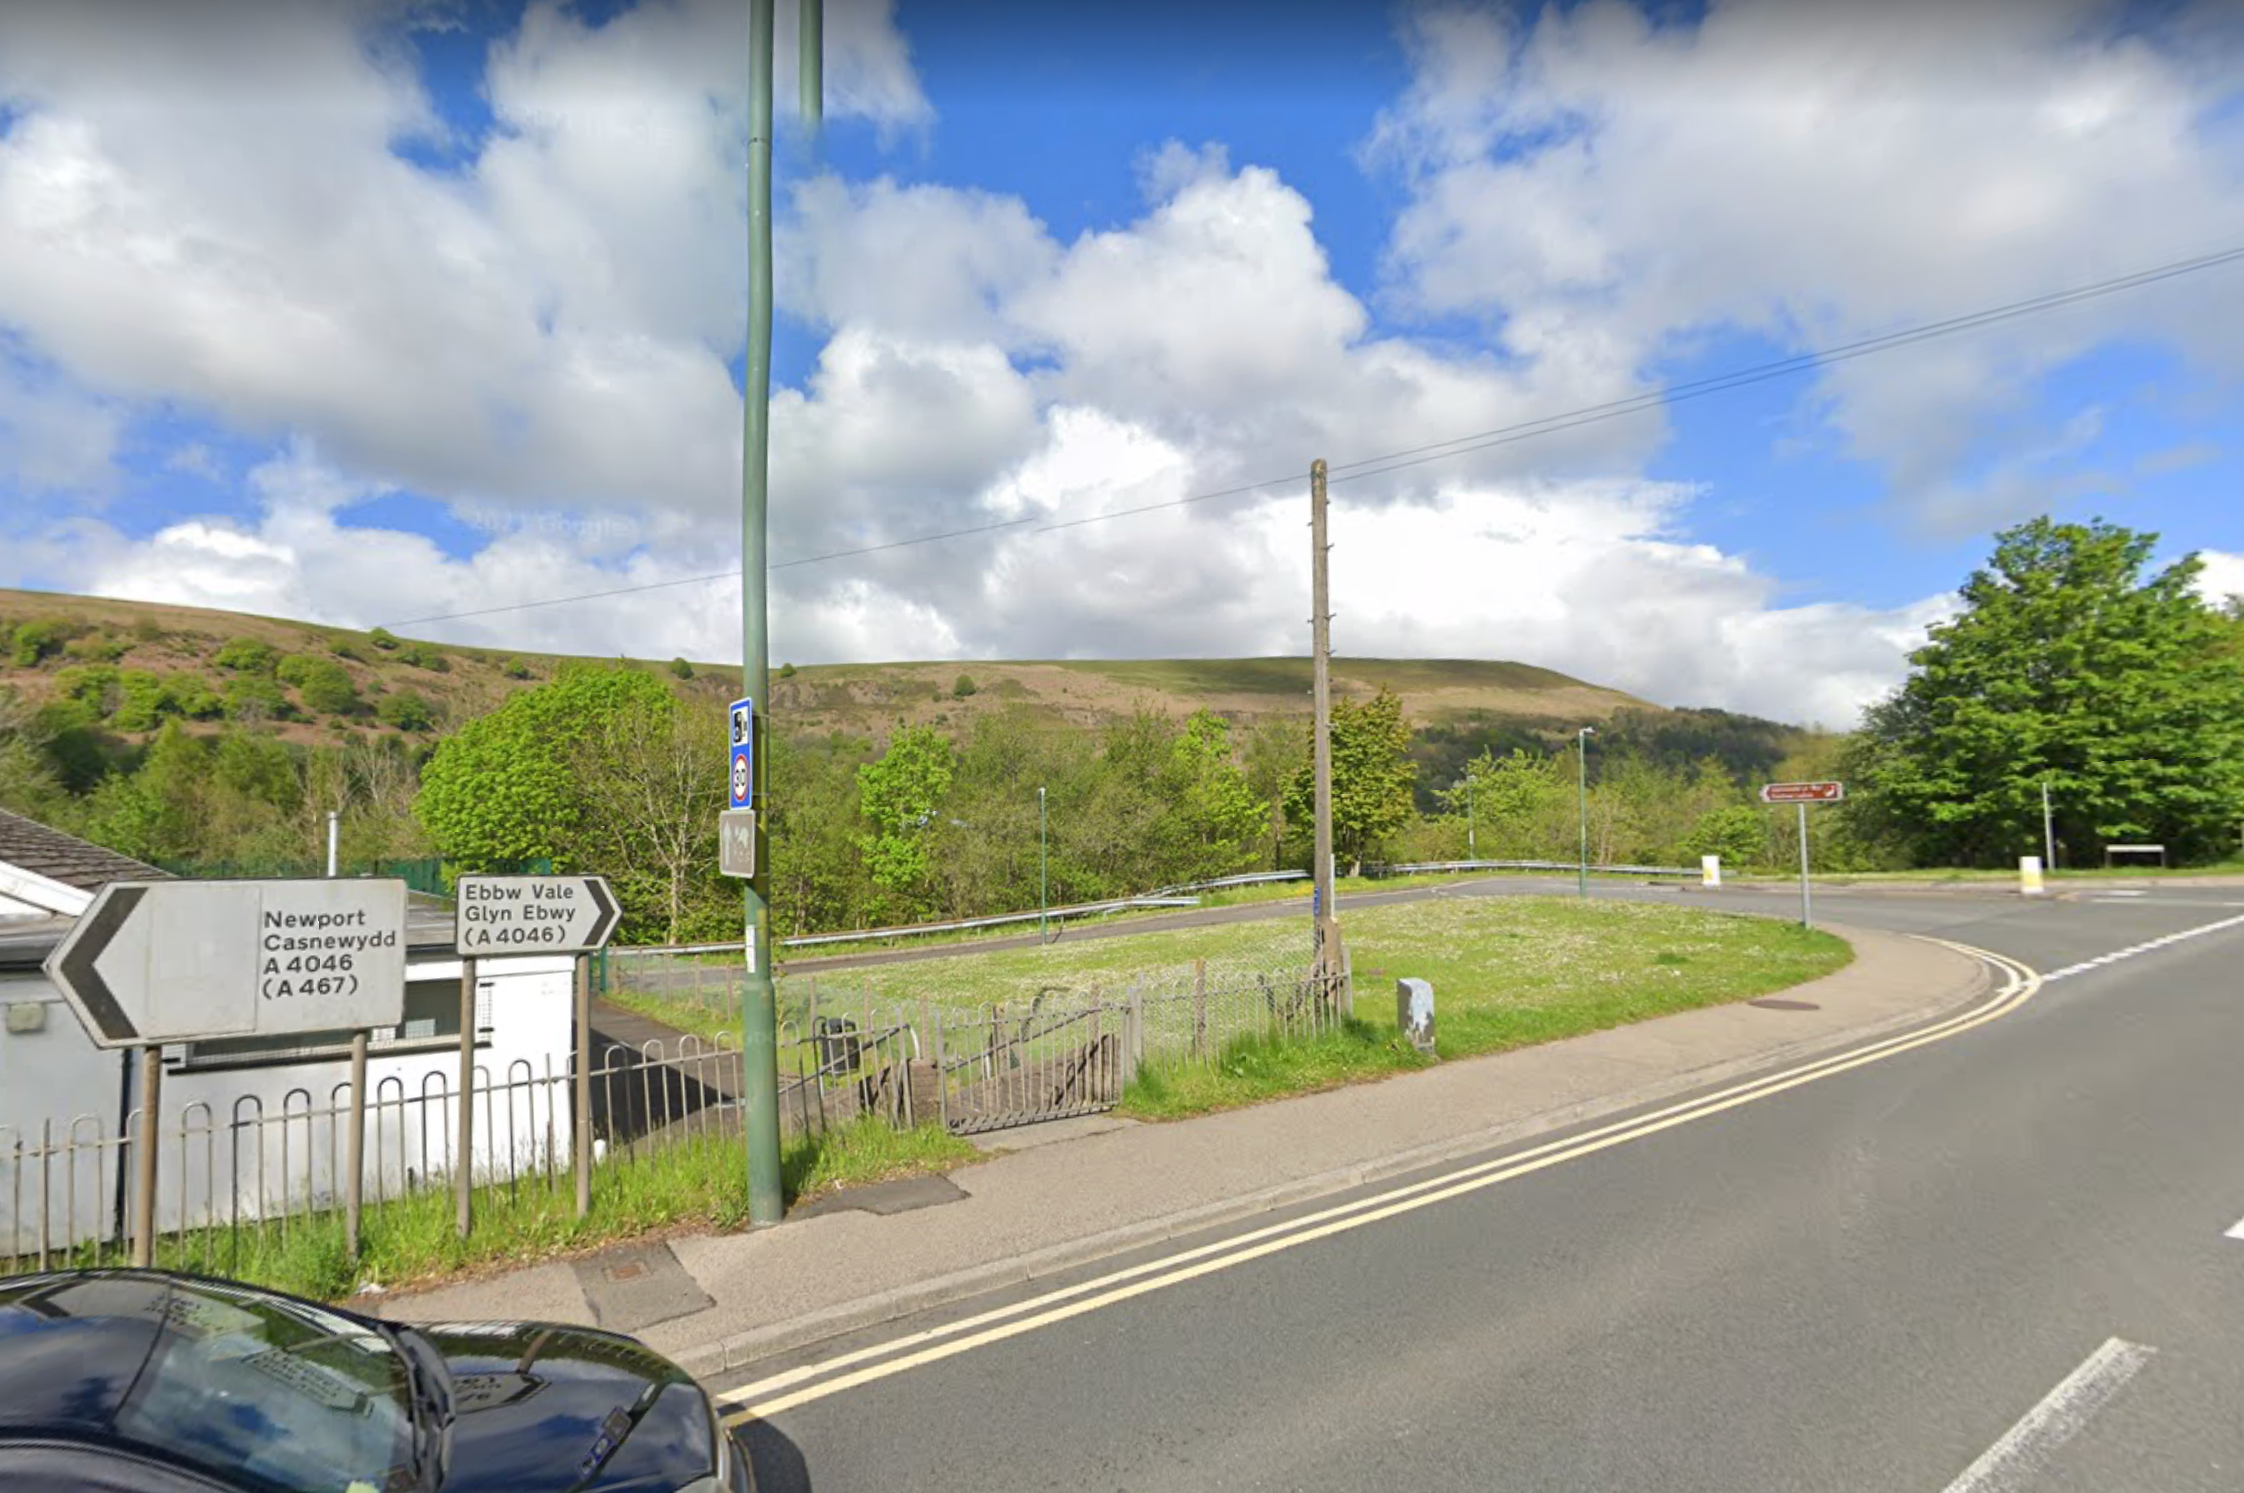 The crash happened on the A4046 Cwm road, near Ebbw Vale